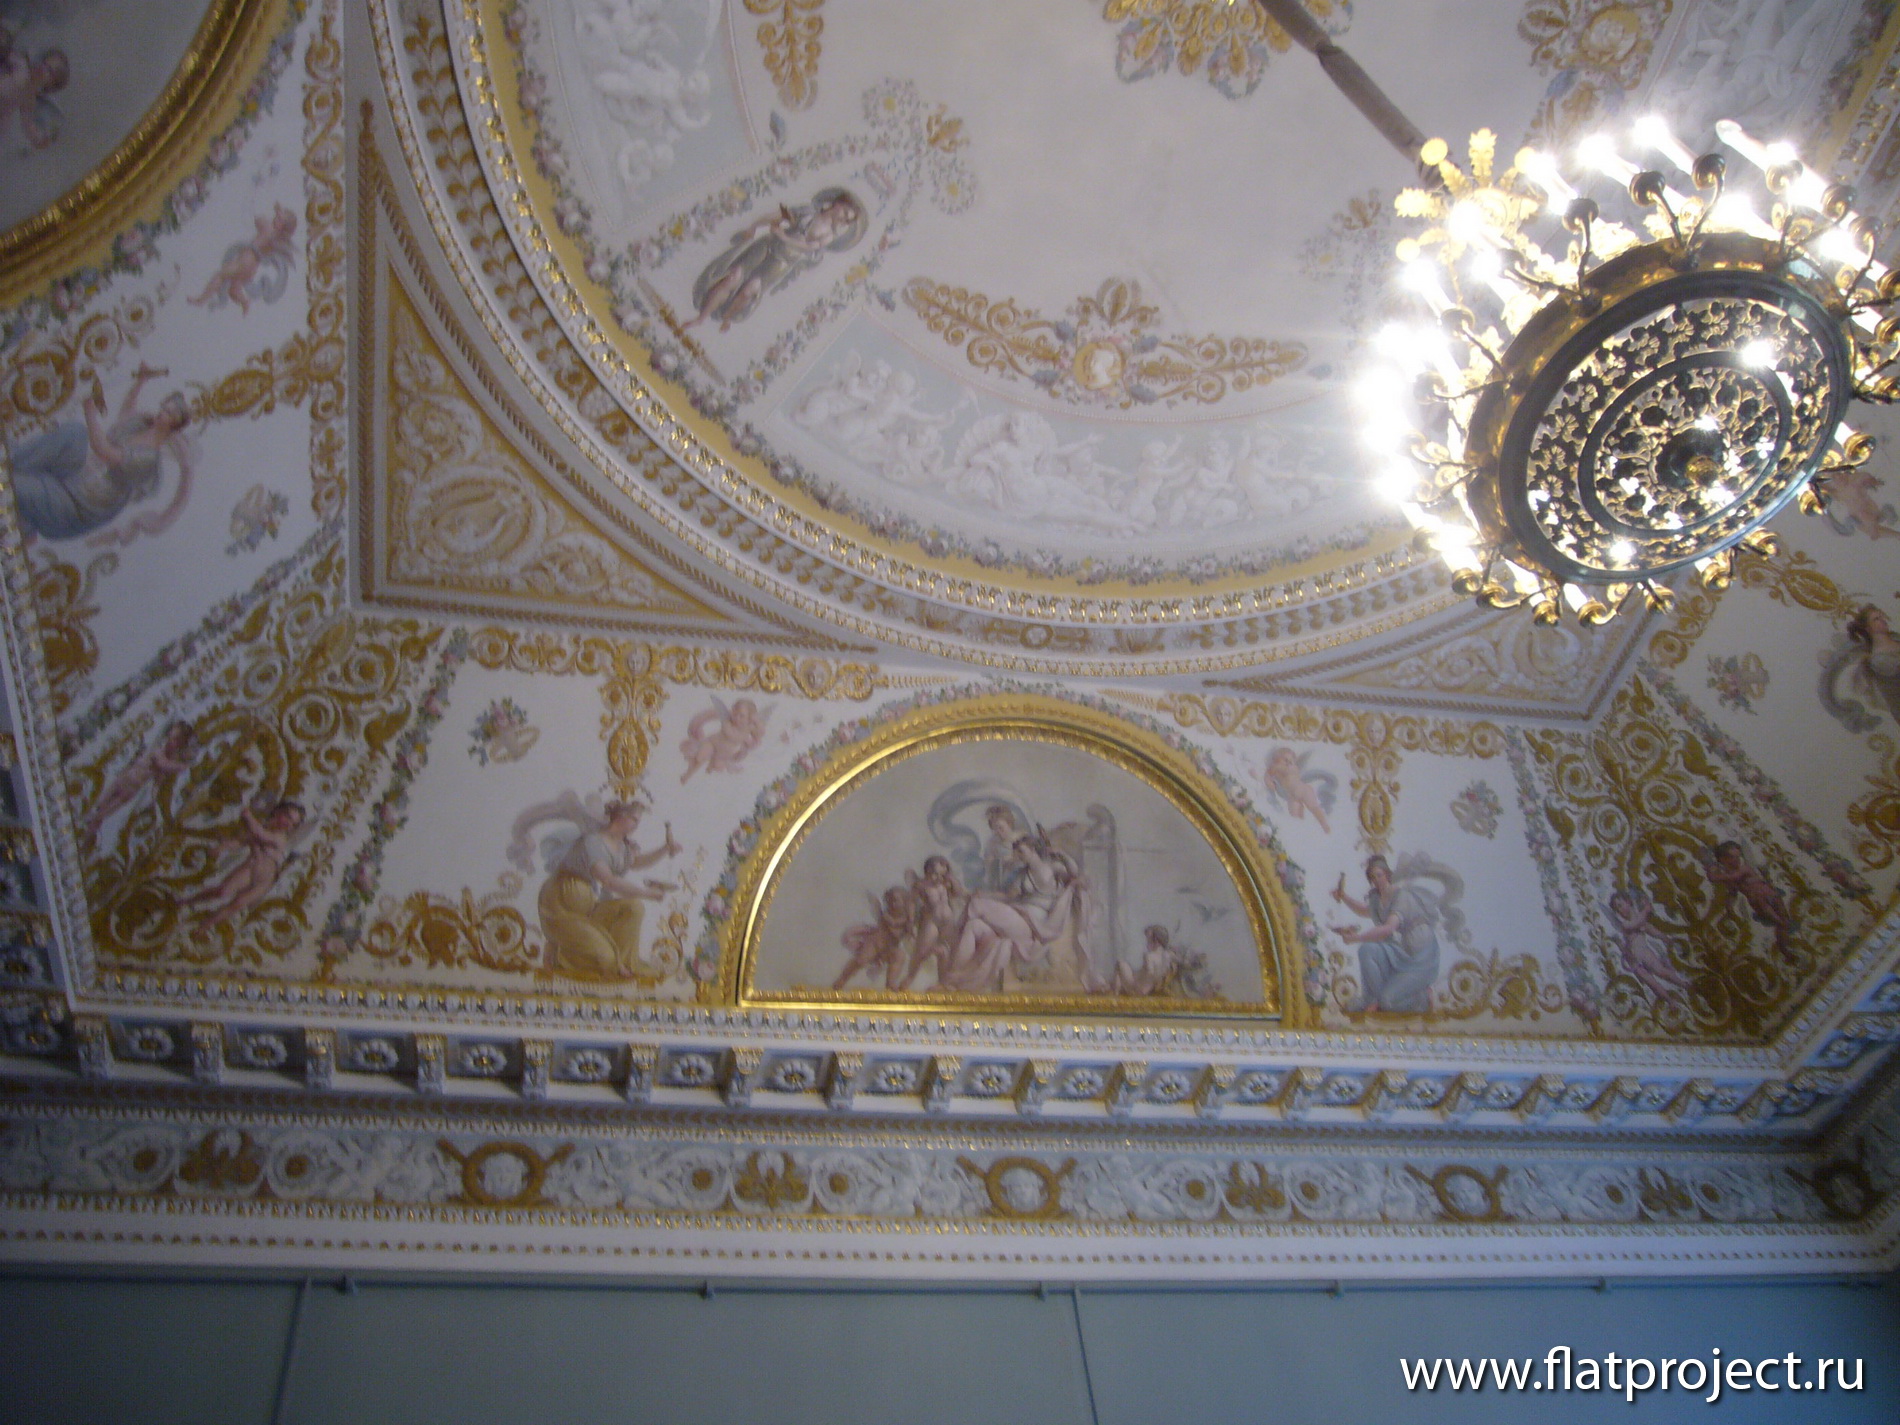 The State Russian museum interiors – photo 67